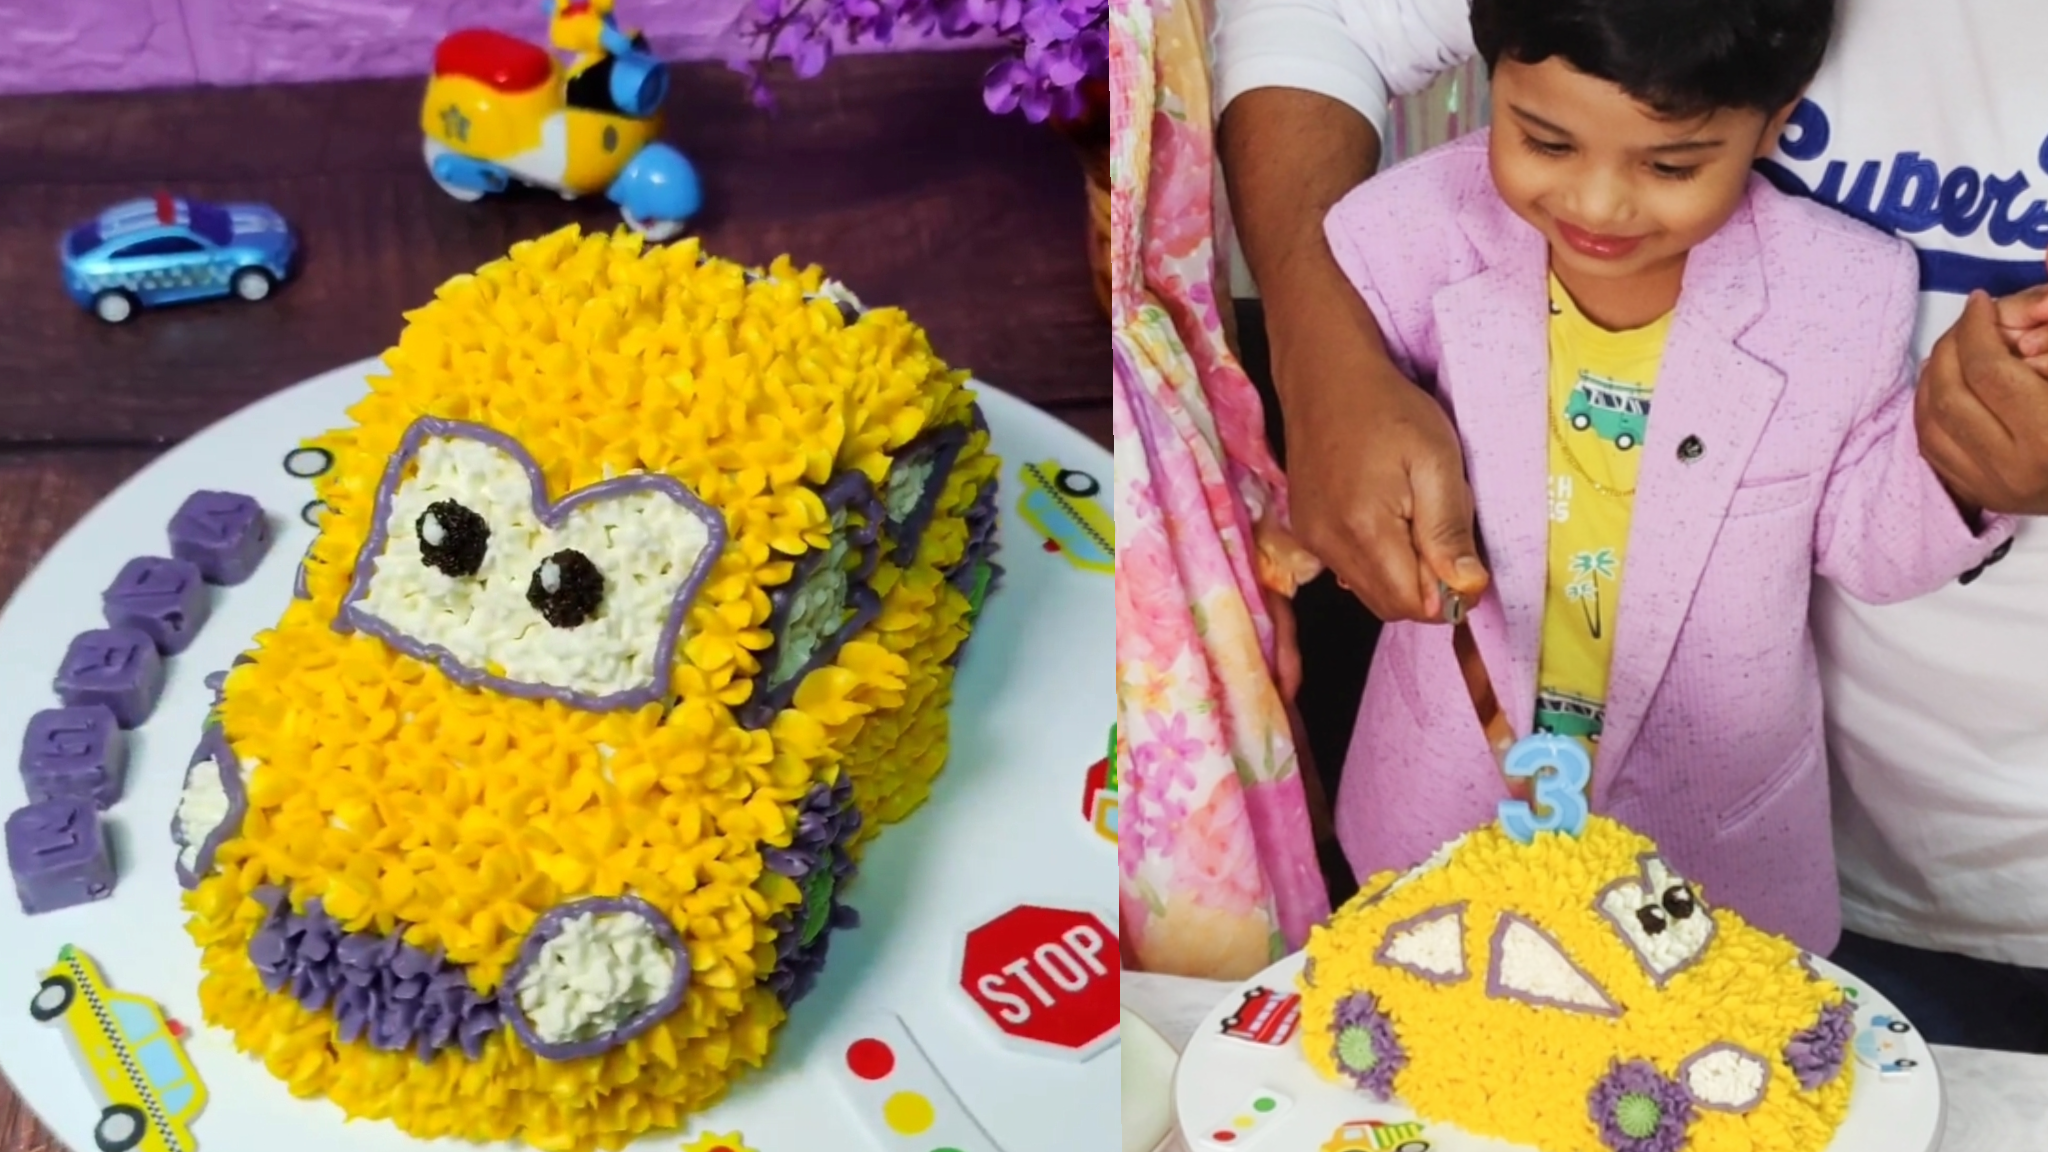 Cartoon Car Cake - A Fun and Exciting Cake for Kids of All Ages